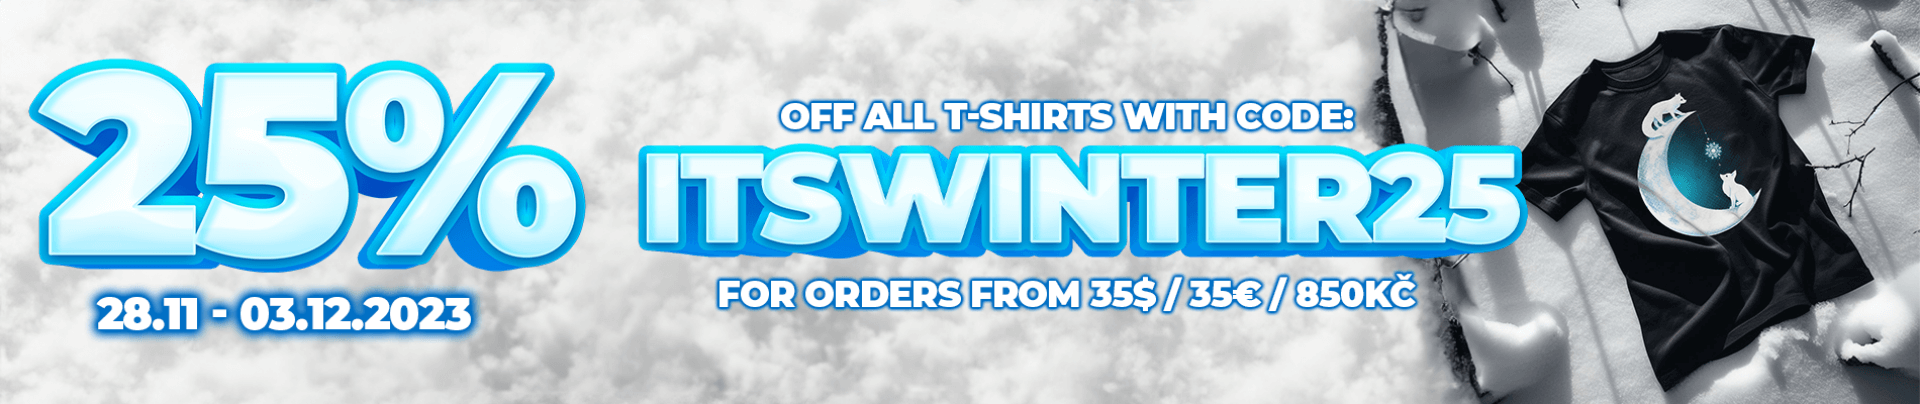 25%off for all T-shirts with code:ITSWINTER25